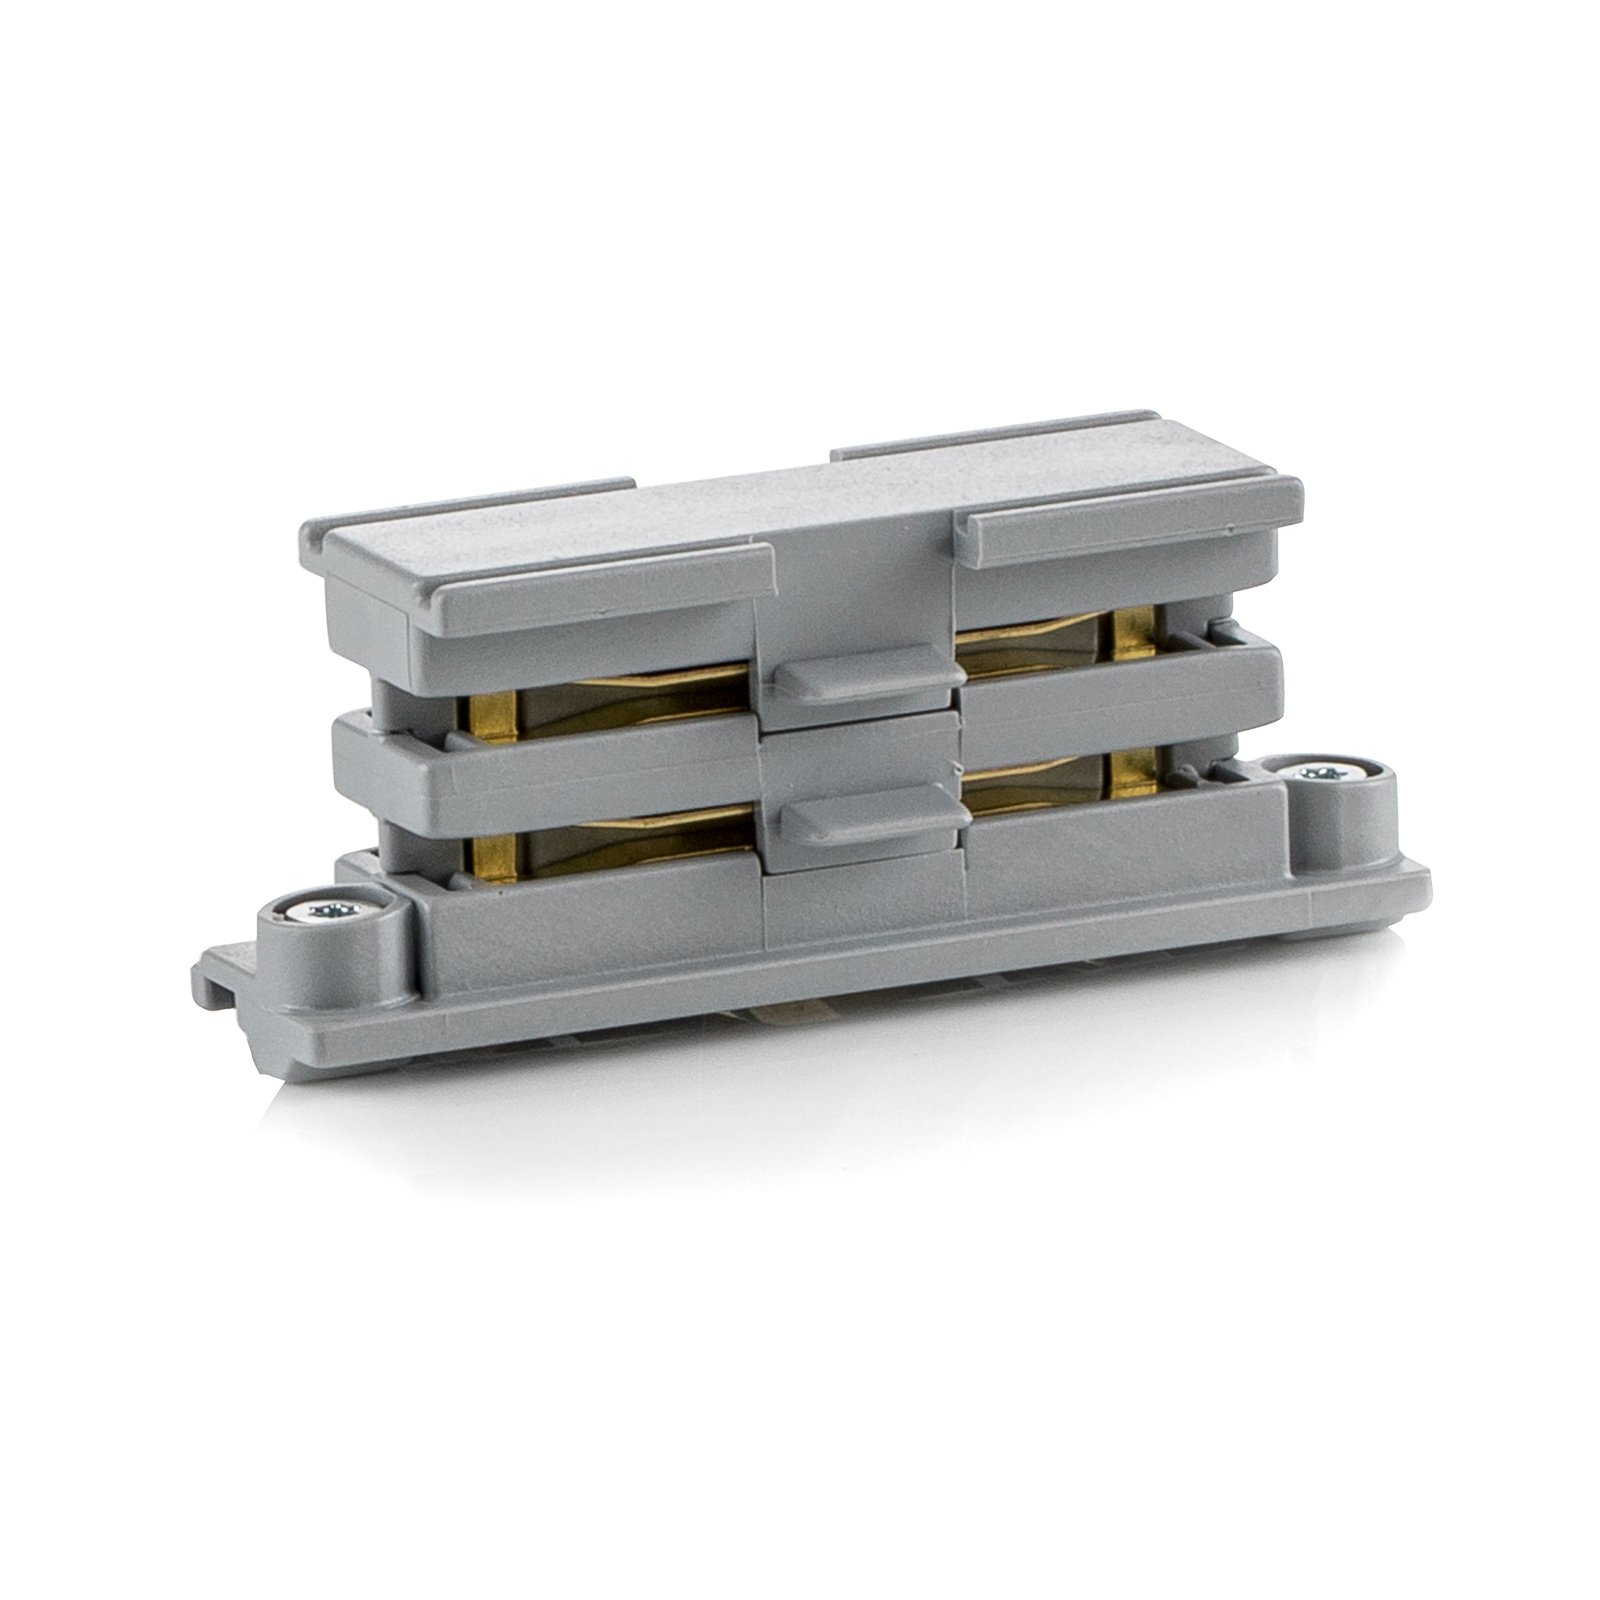 Linear connector for Noa HV track system, grey